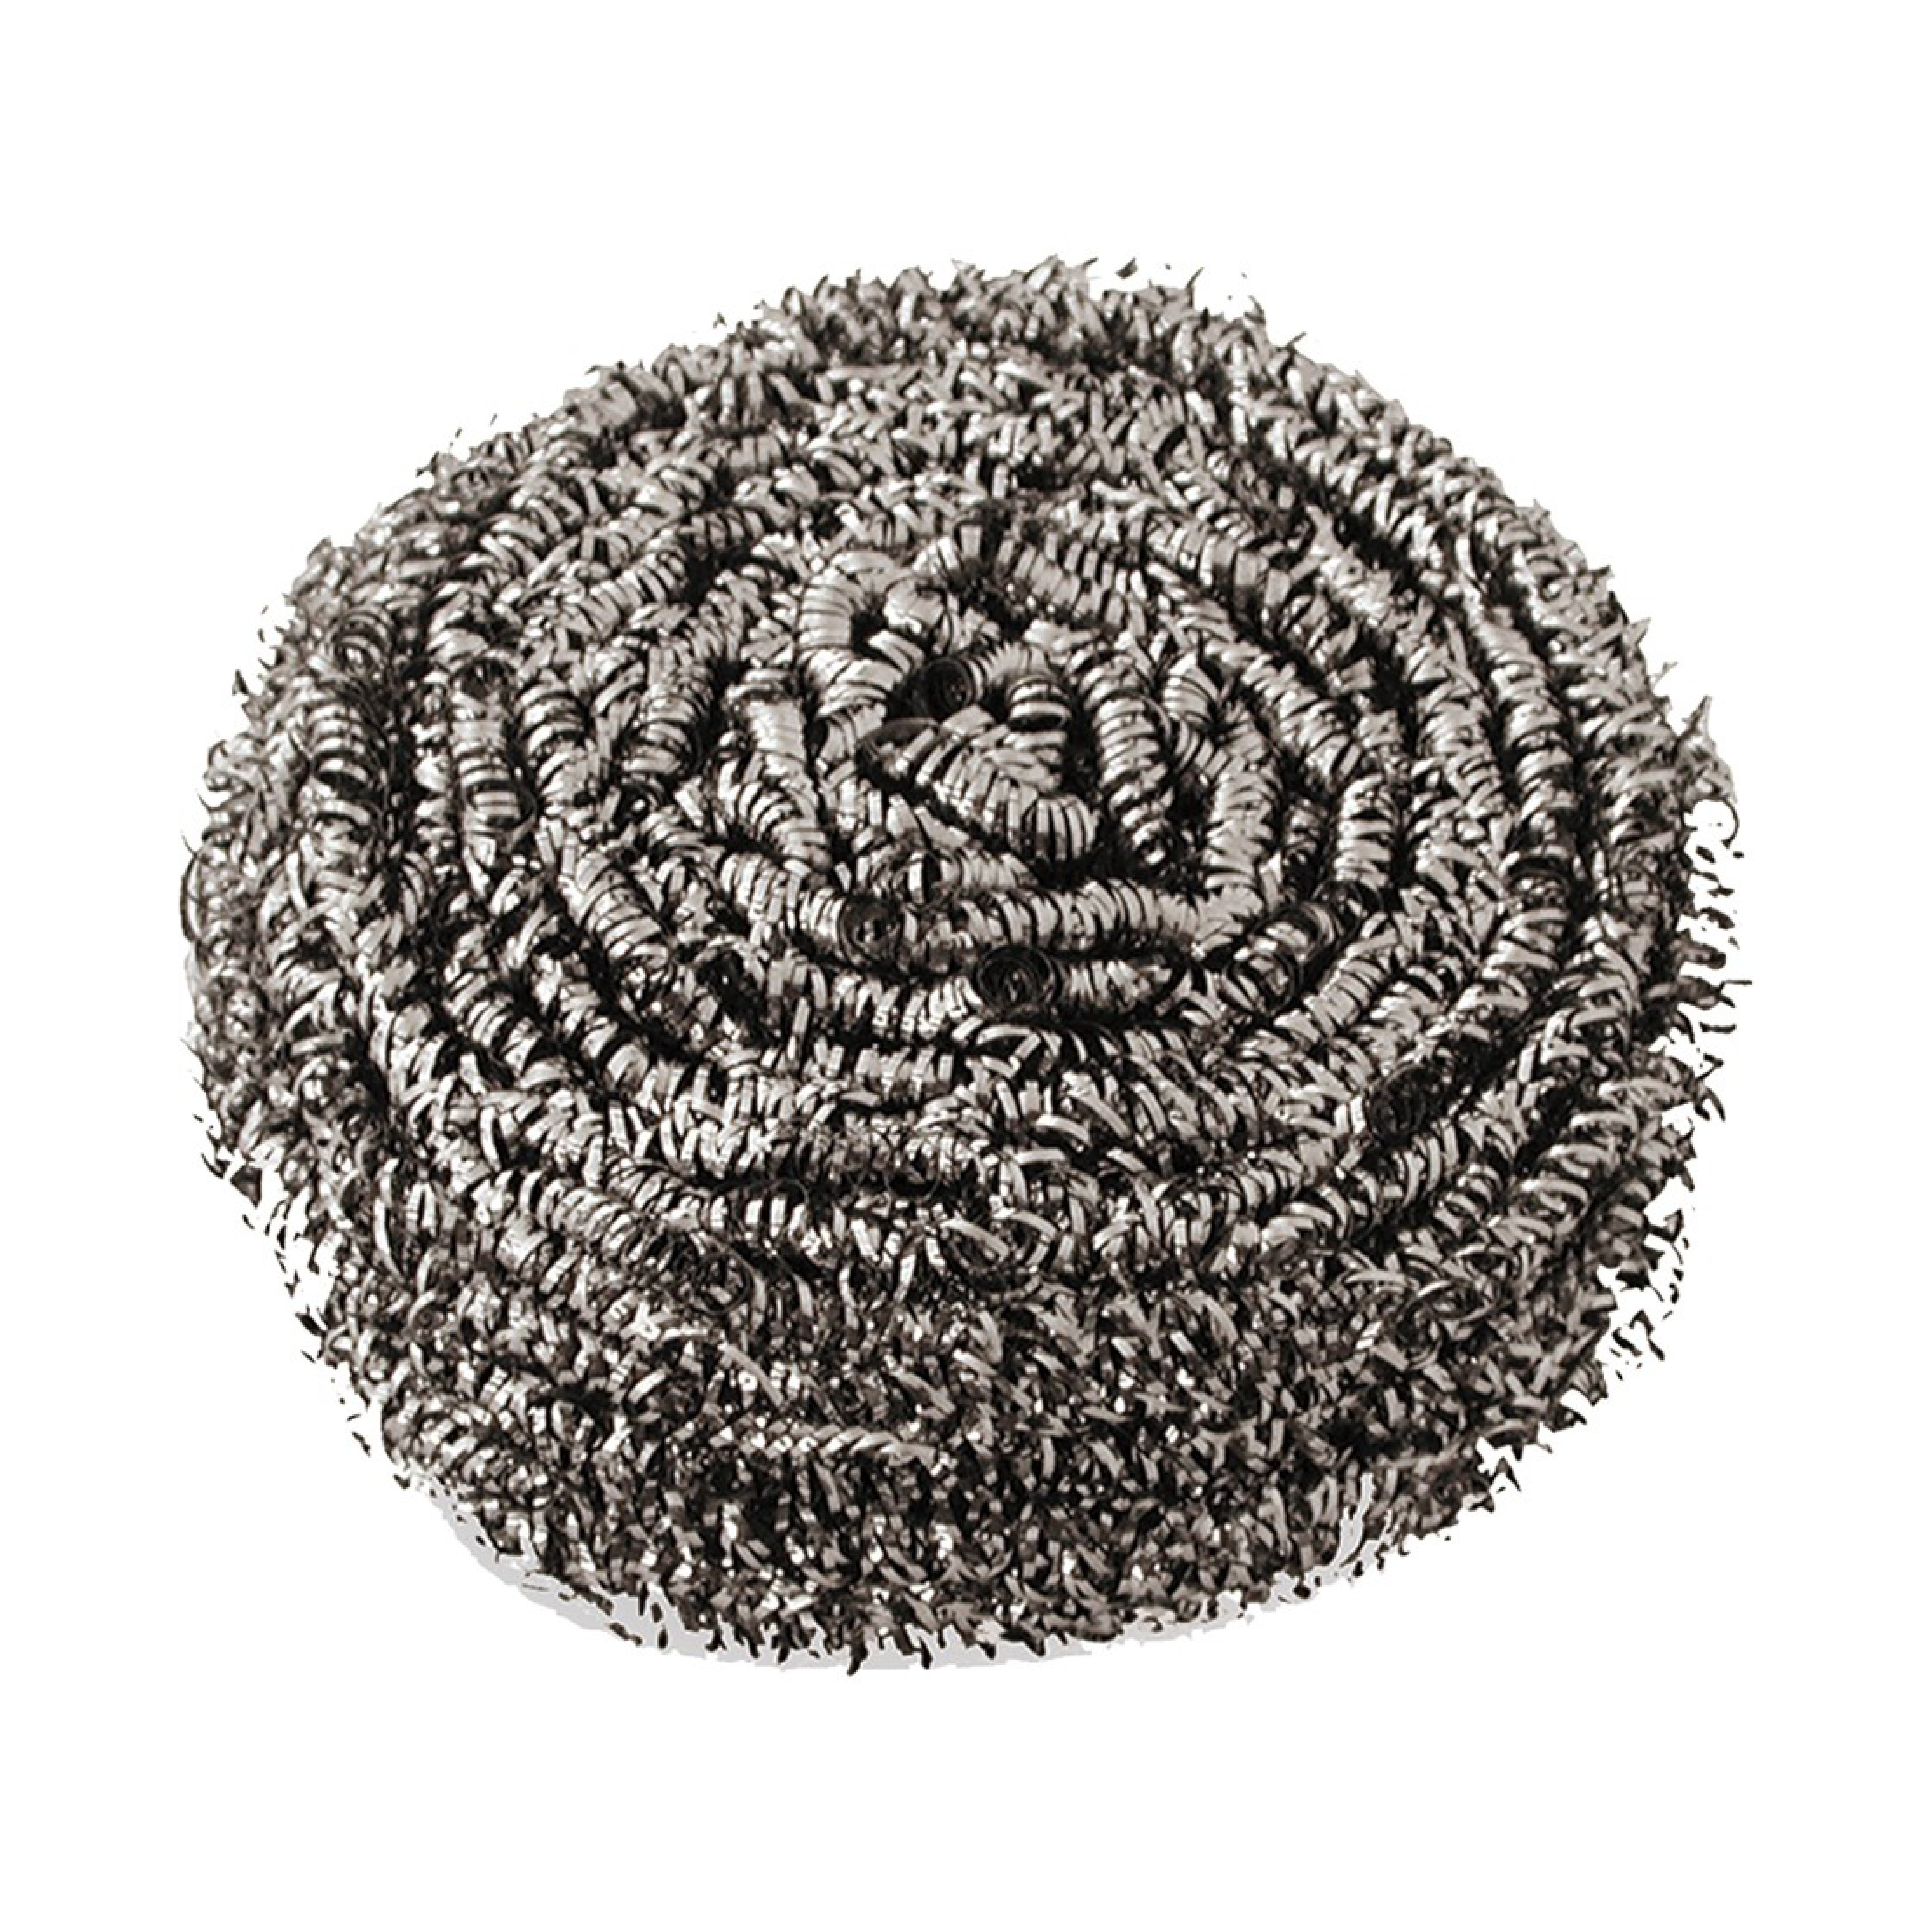 Stainless Steel Scourers (Each)